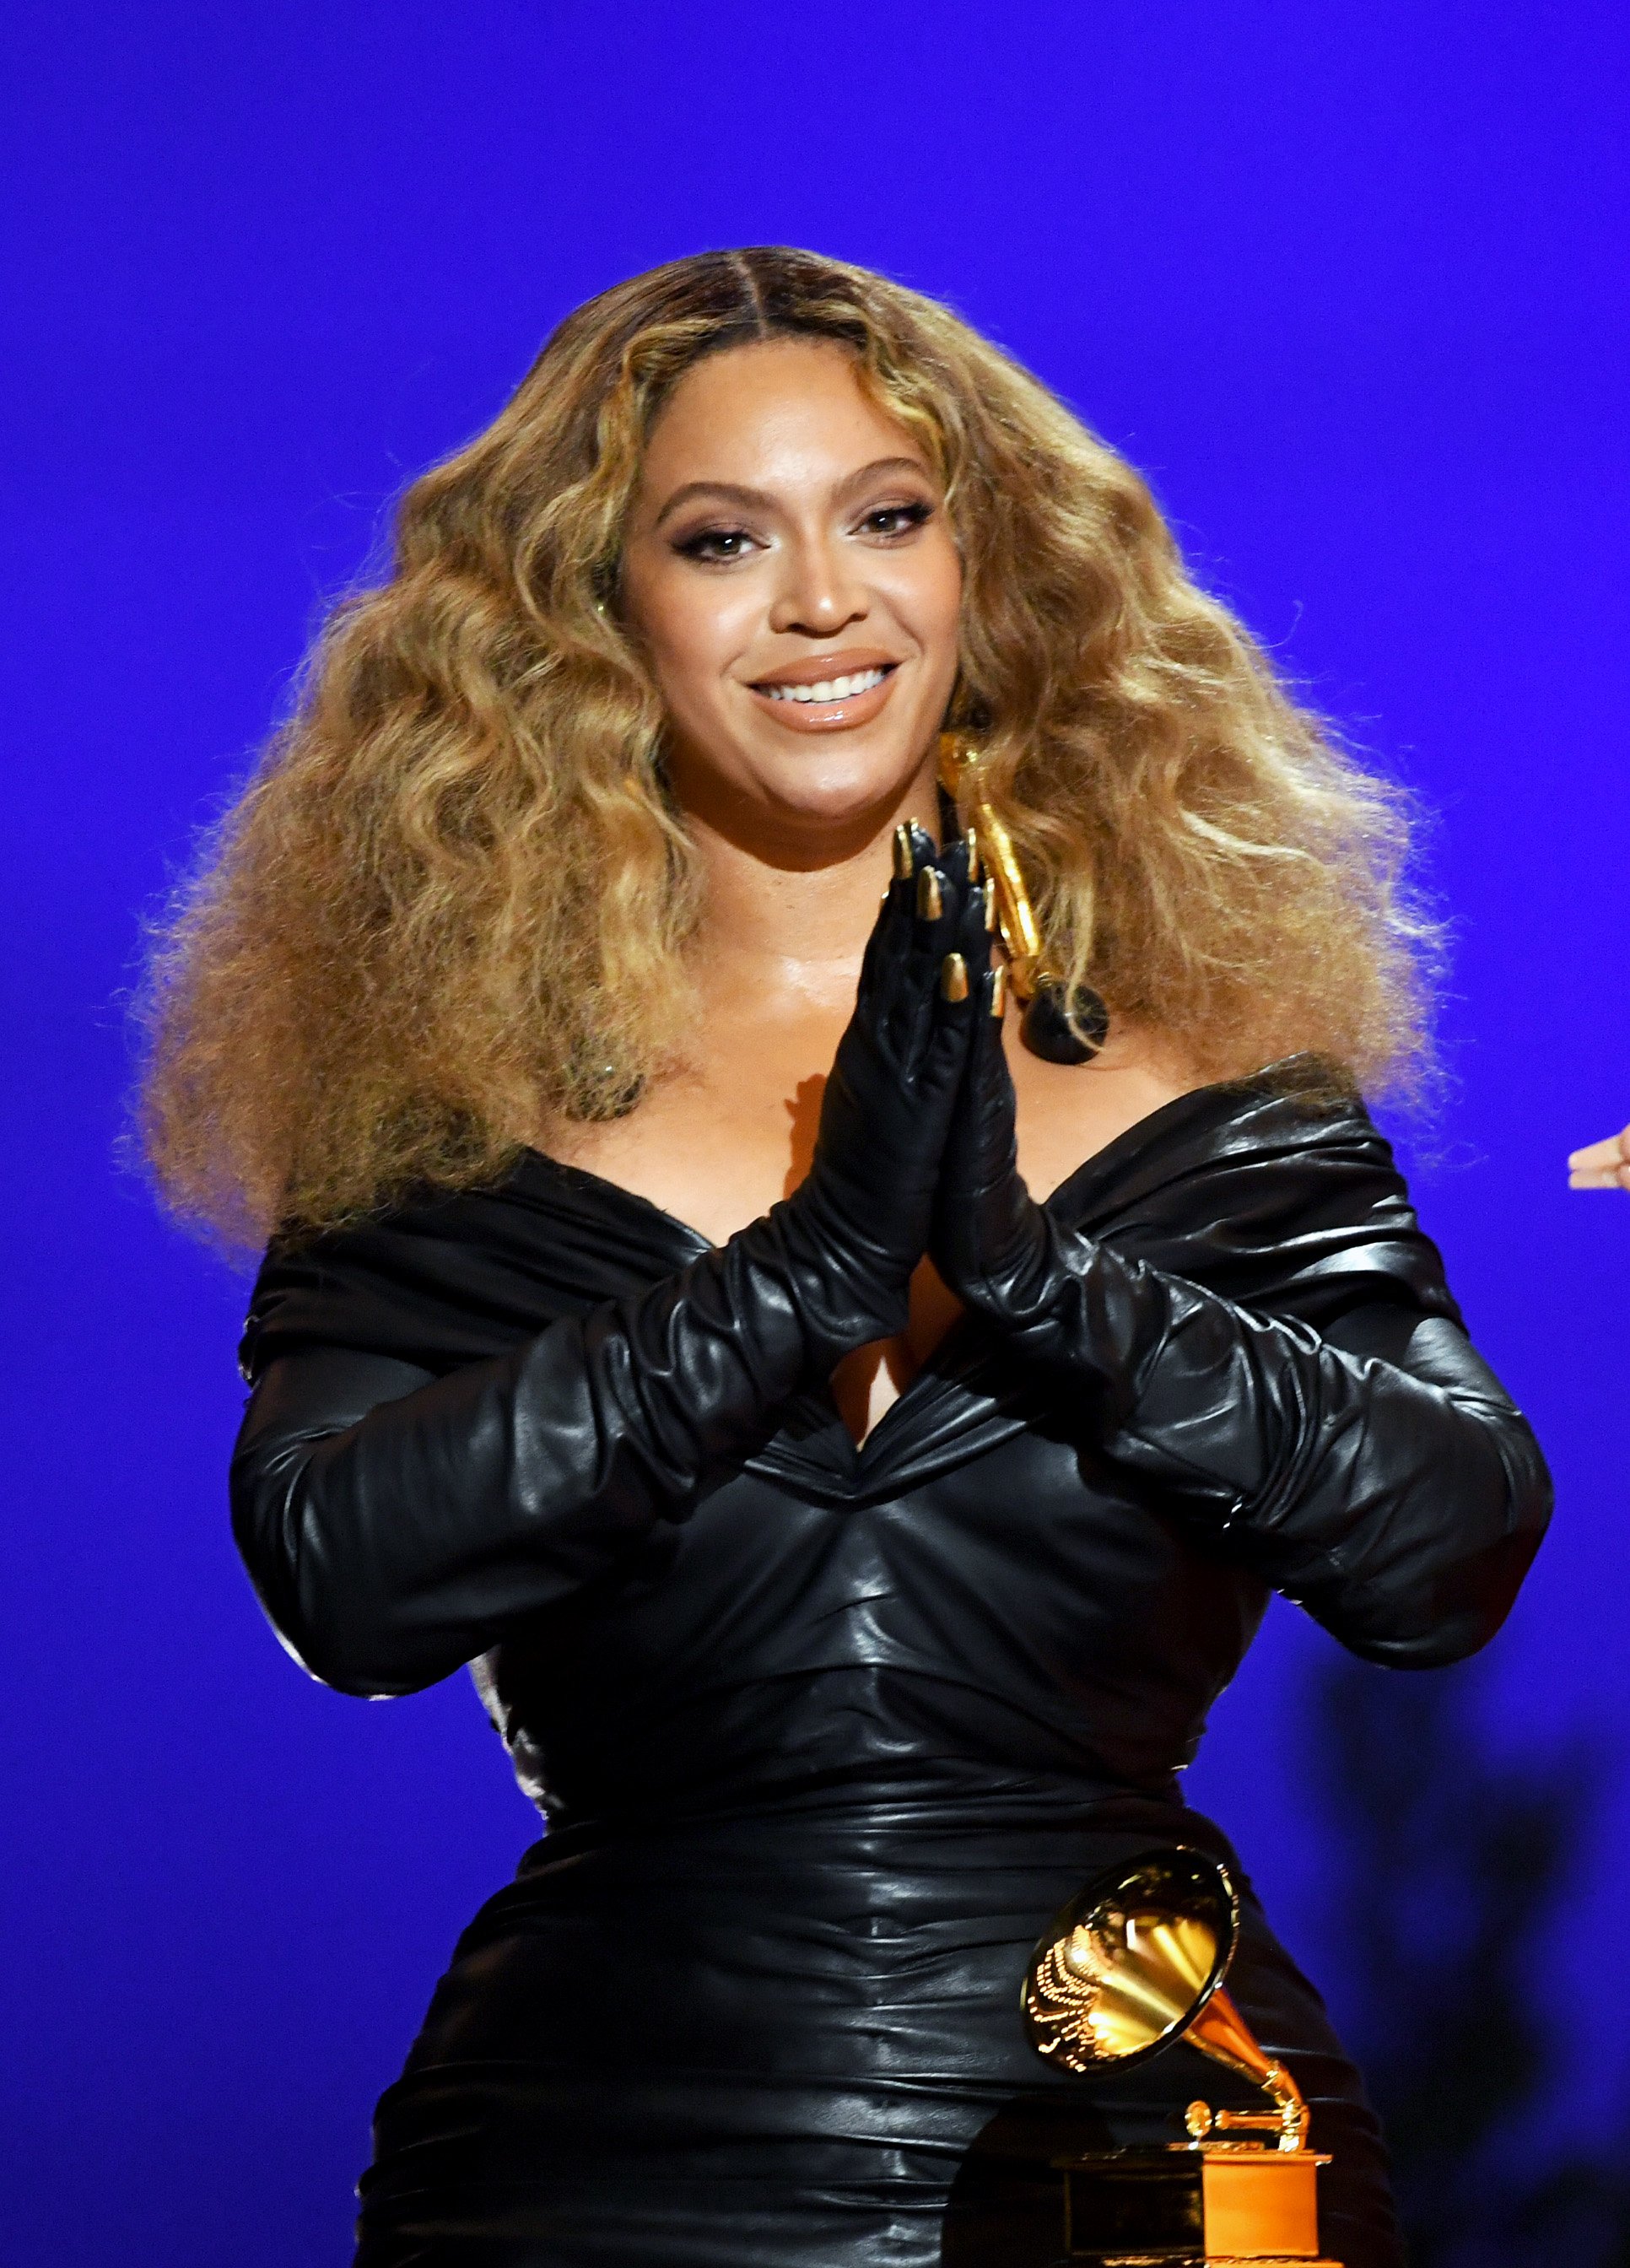 Beyoncé accepts an award at the 63rd Annual Grammy Awards on March 14, 2021 in Los Angeles, California | Photo: Getty Images